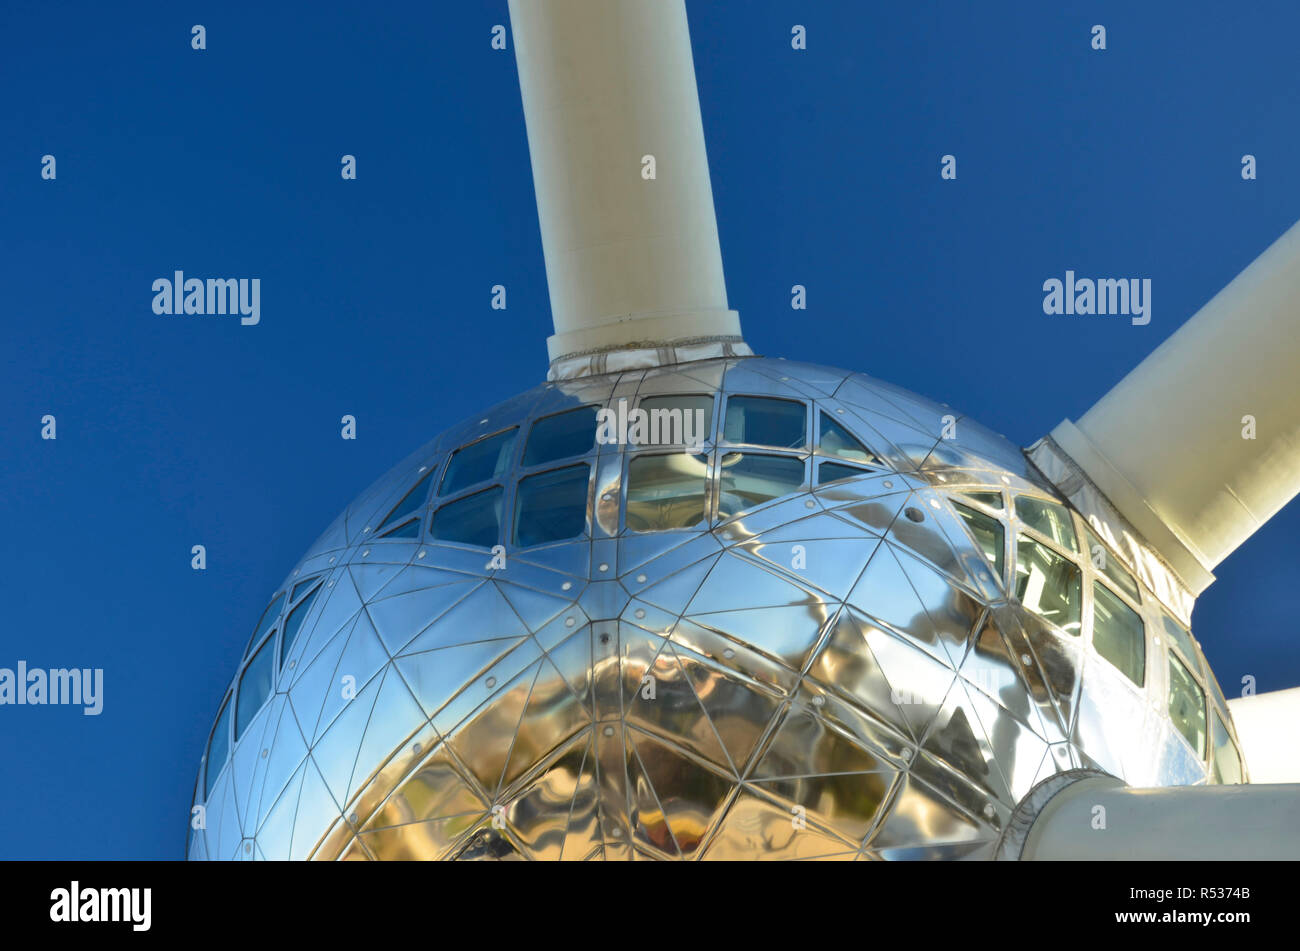 The Atomium in Bruxelles, built in 1958 for Brussels World's Fair by André and Jean Polak and André Waterkey. 2016 Stock Photo